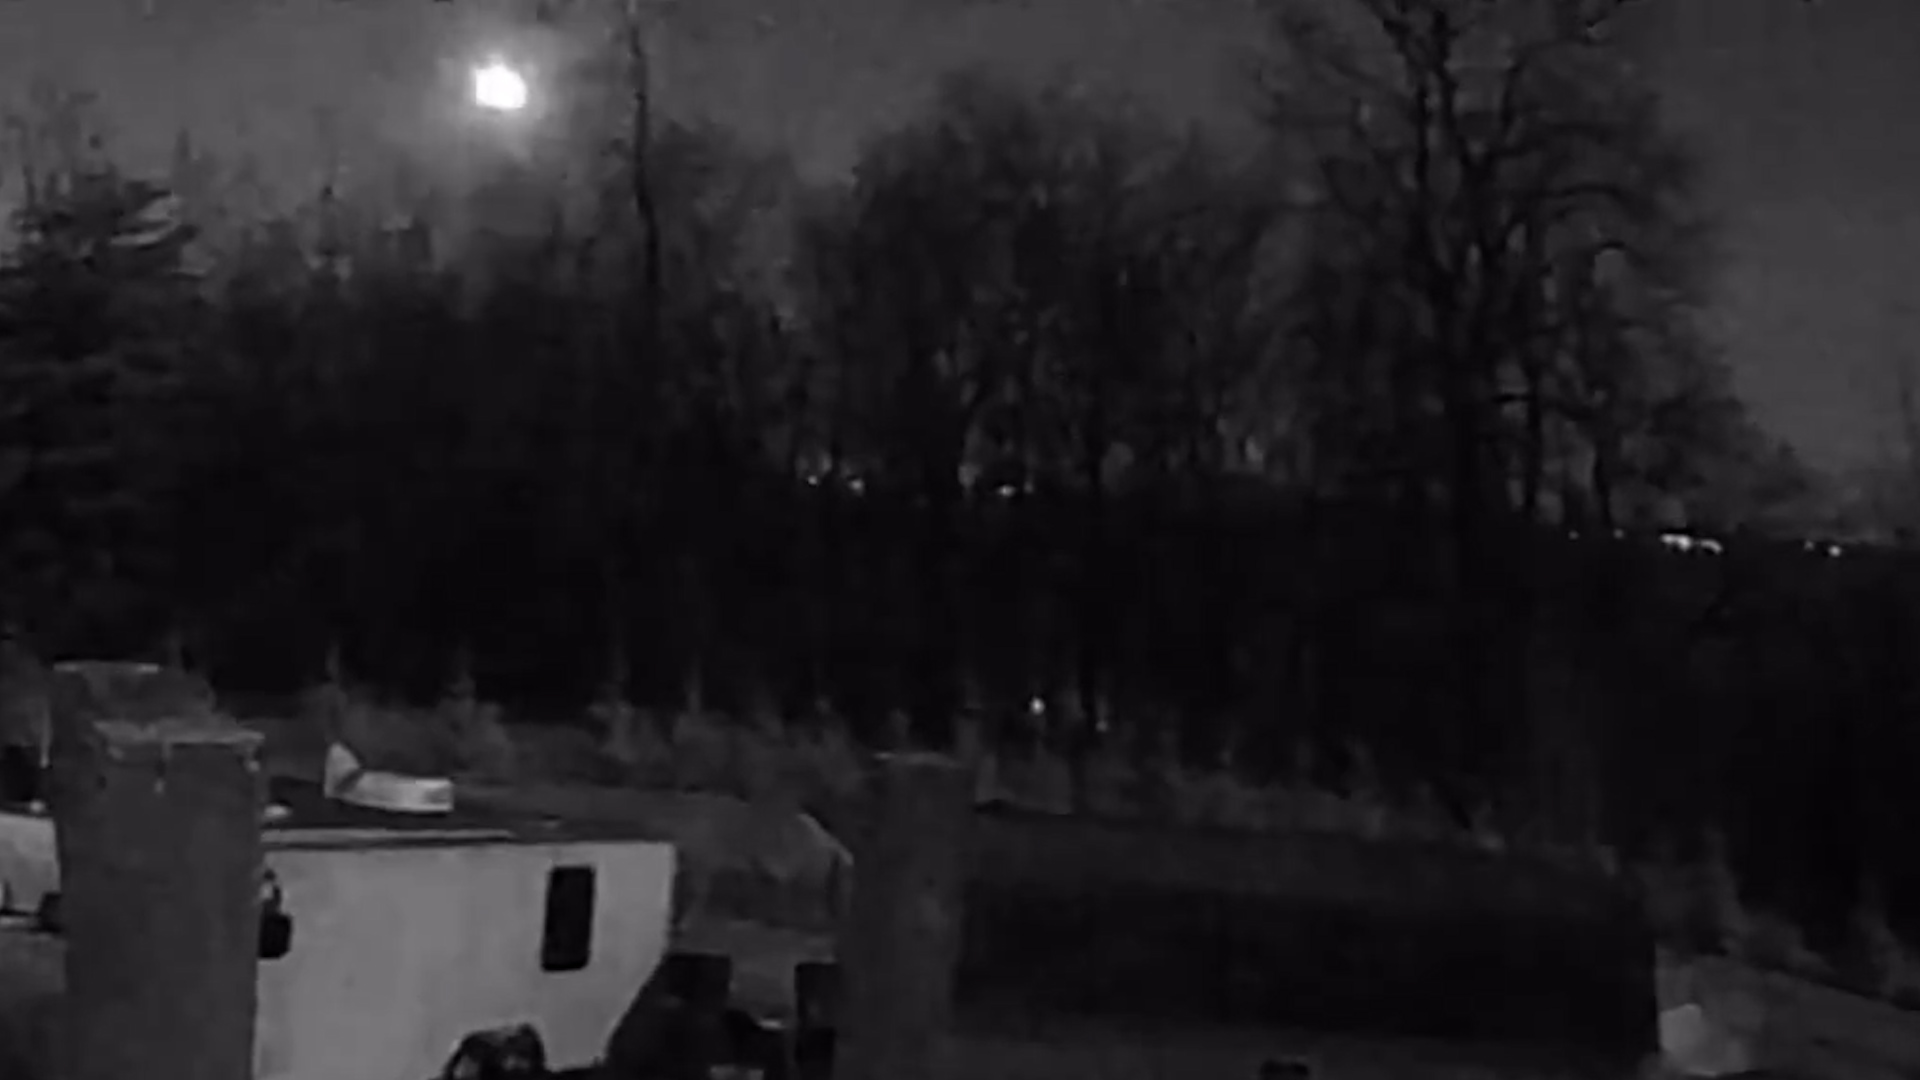 Bright meteor streaks over skies from D.C. area to New York state